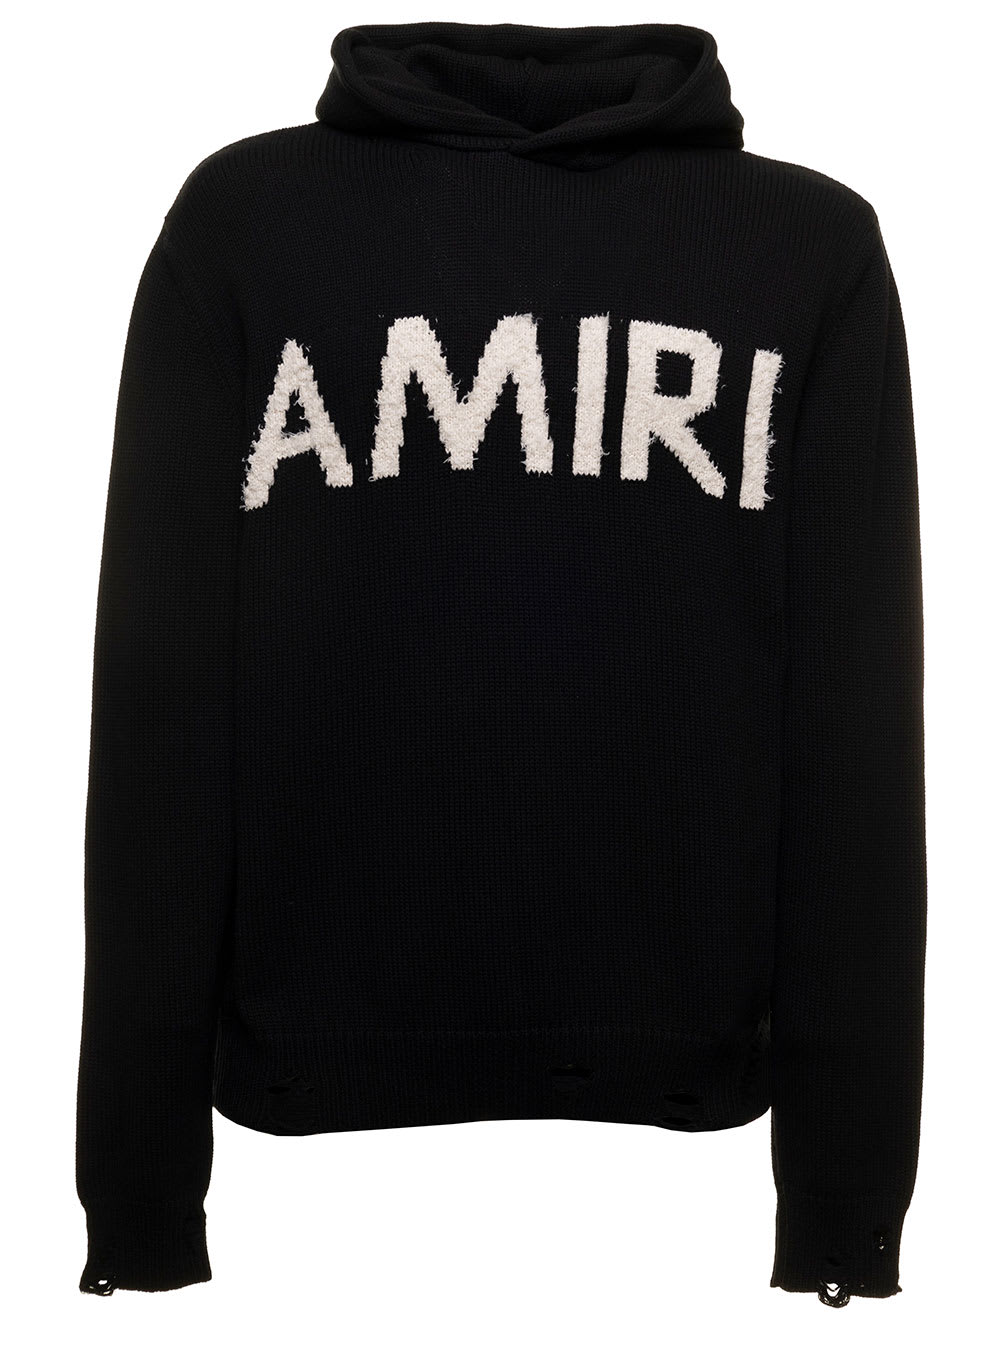 AMIRI Black Hooded Sweater In Knitted Cotton And Cashmere Blend With Contrasting Jacquard Eyelash Logo To The Chest Amiri Man